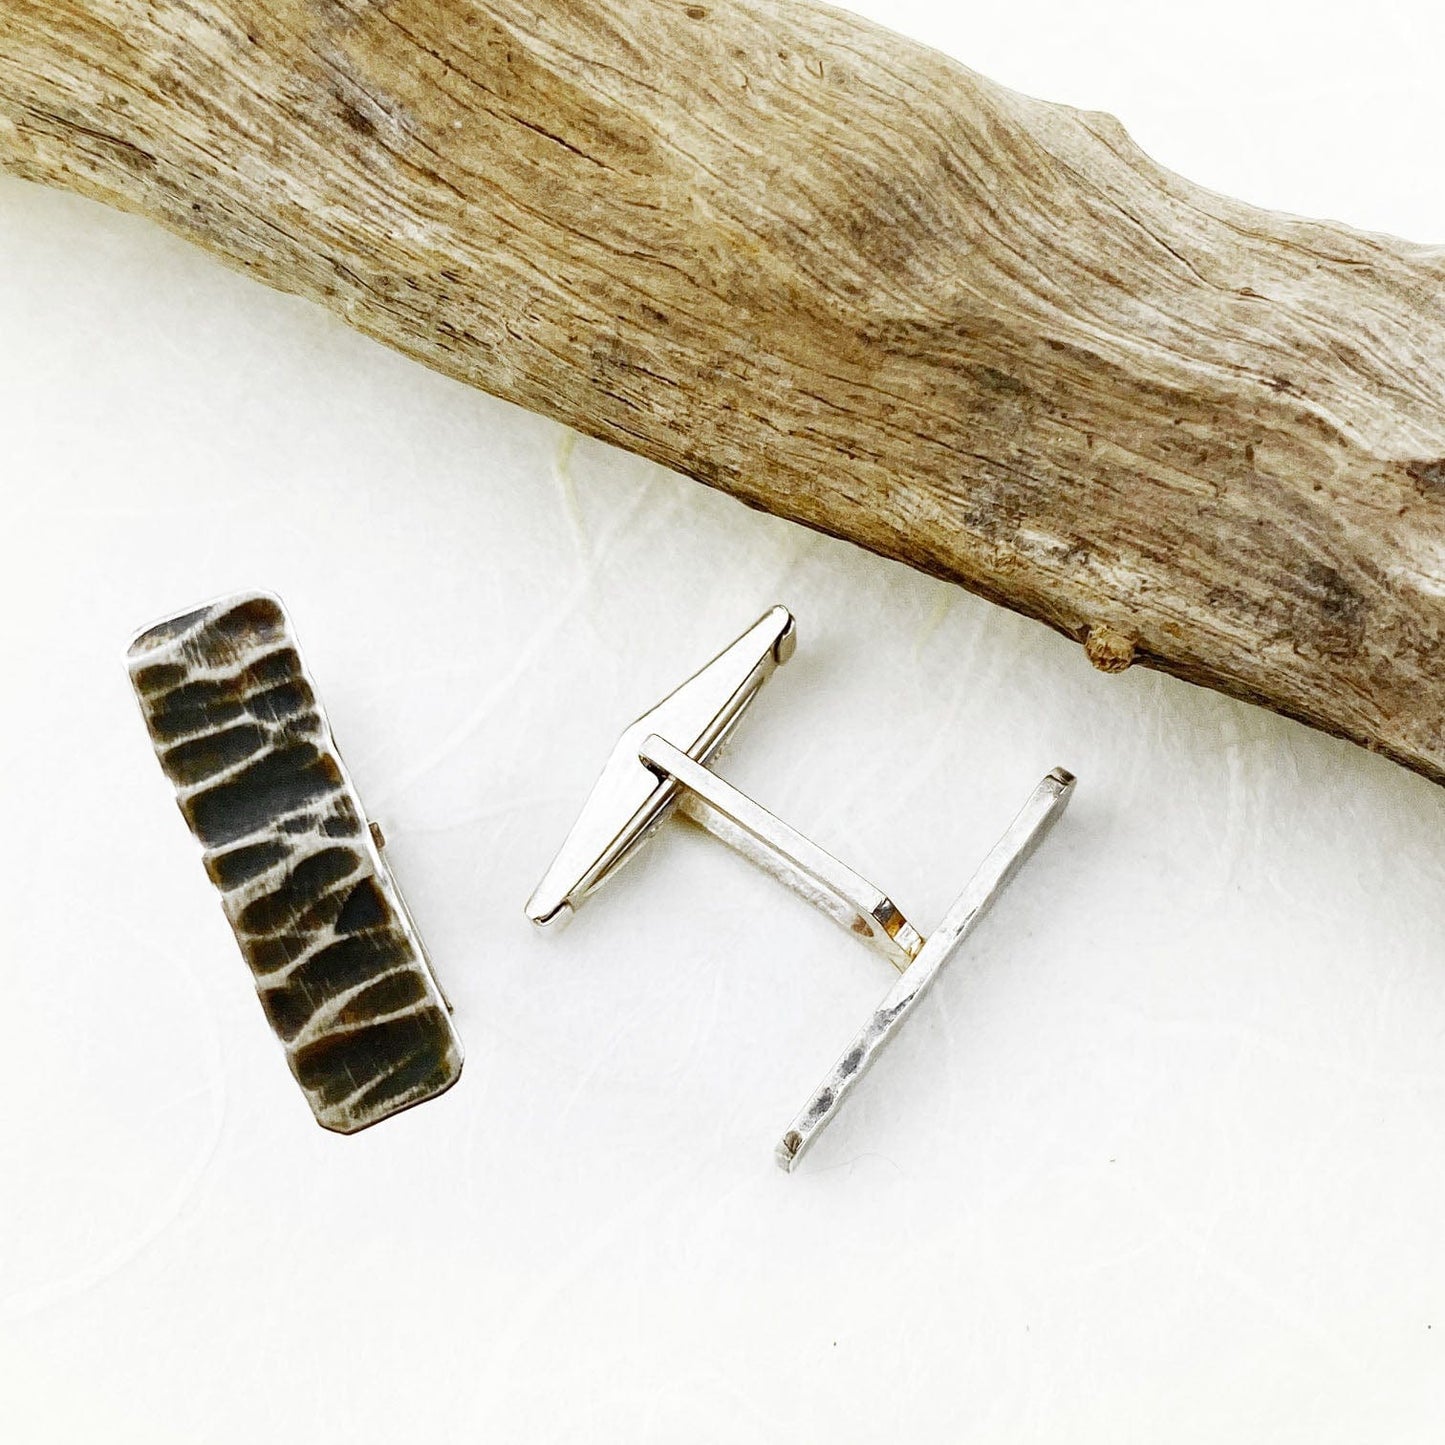 Rough and Tumble Silver Cuff Links